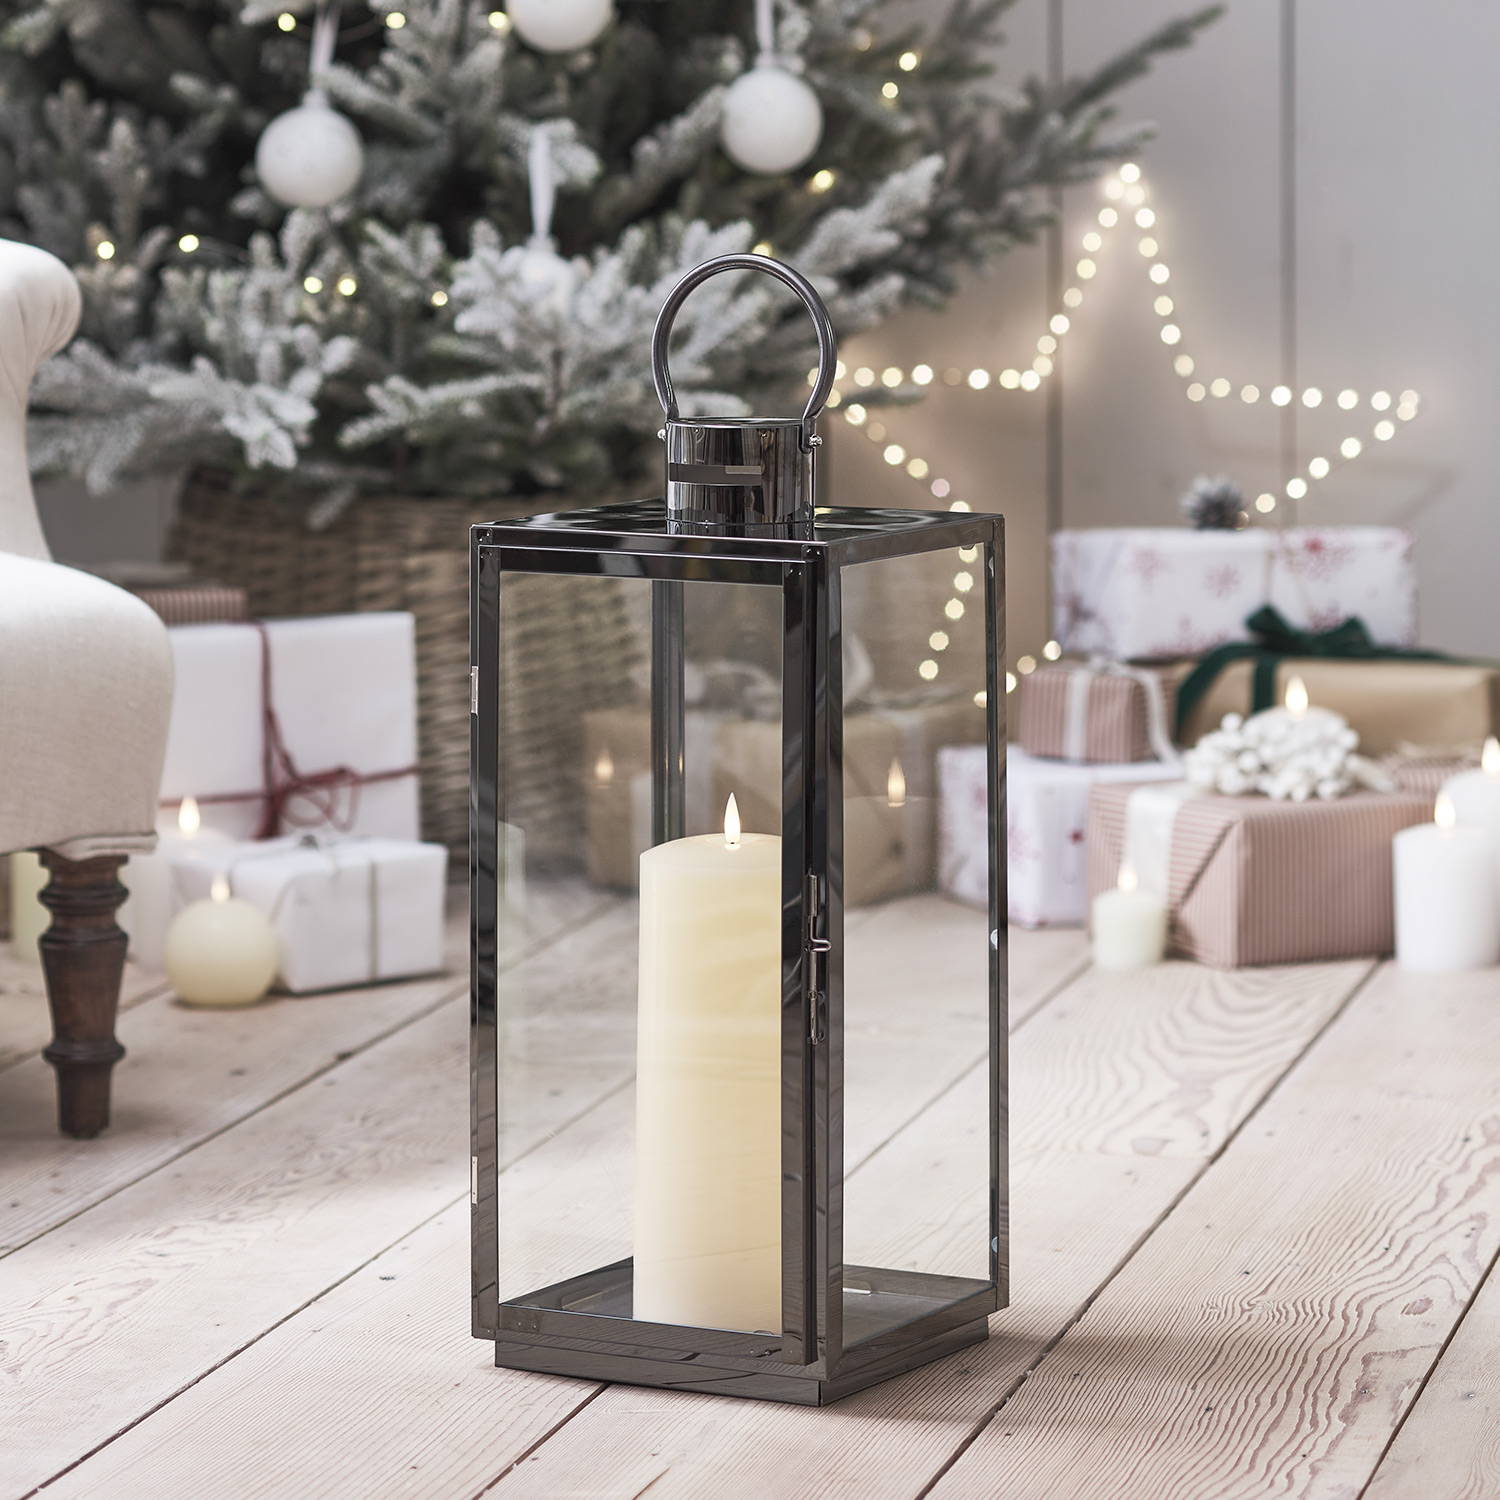 An indoor steel lantern with a TruGlow LED candle inside in a Christmas setting with presents in the background.